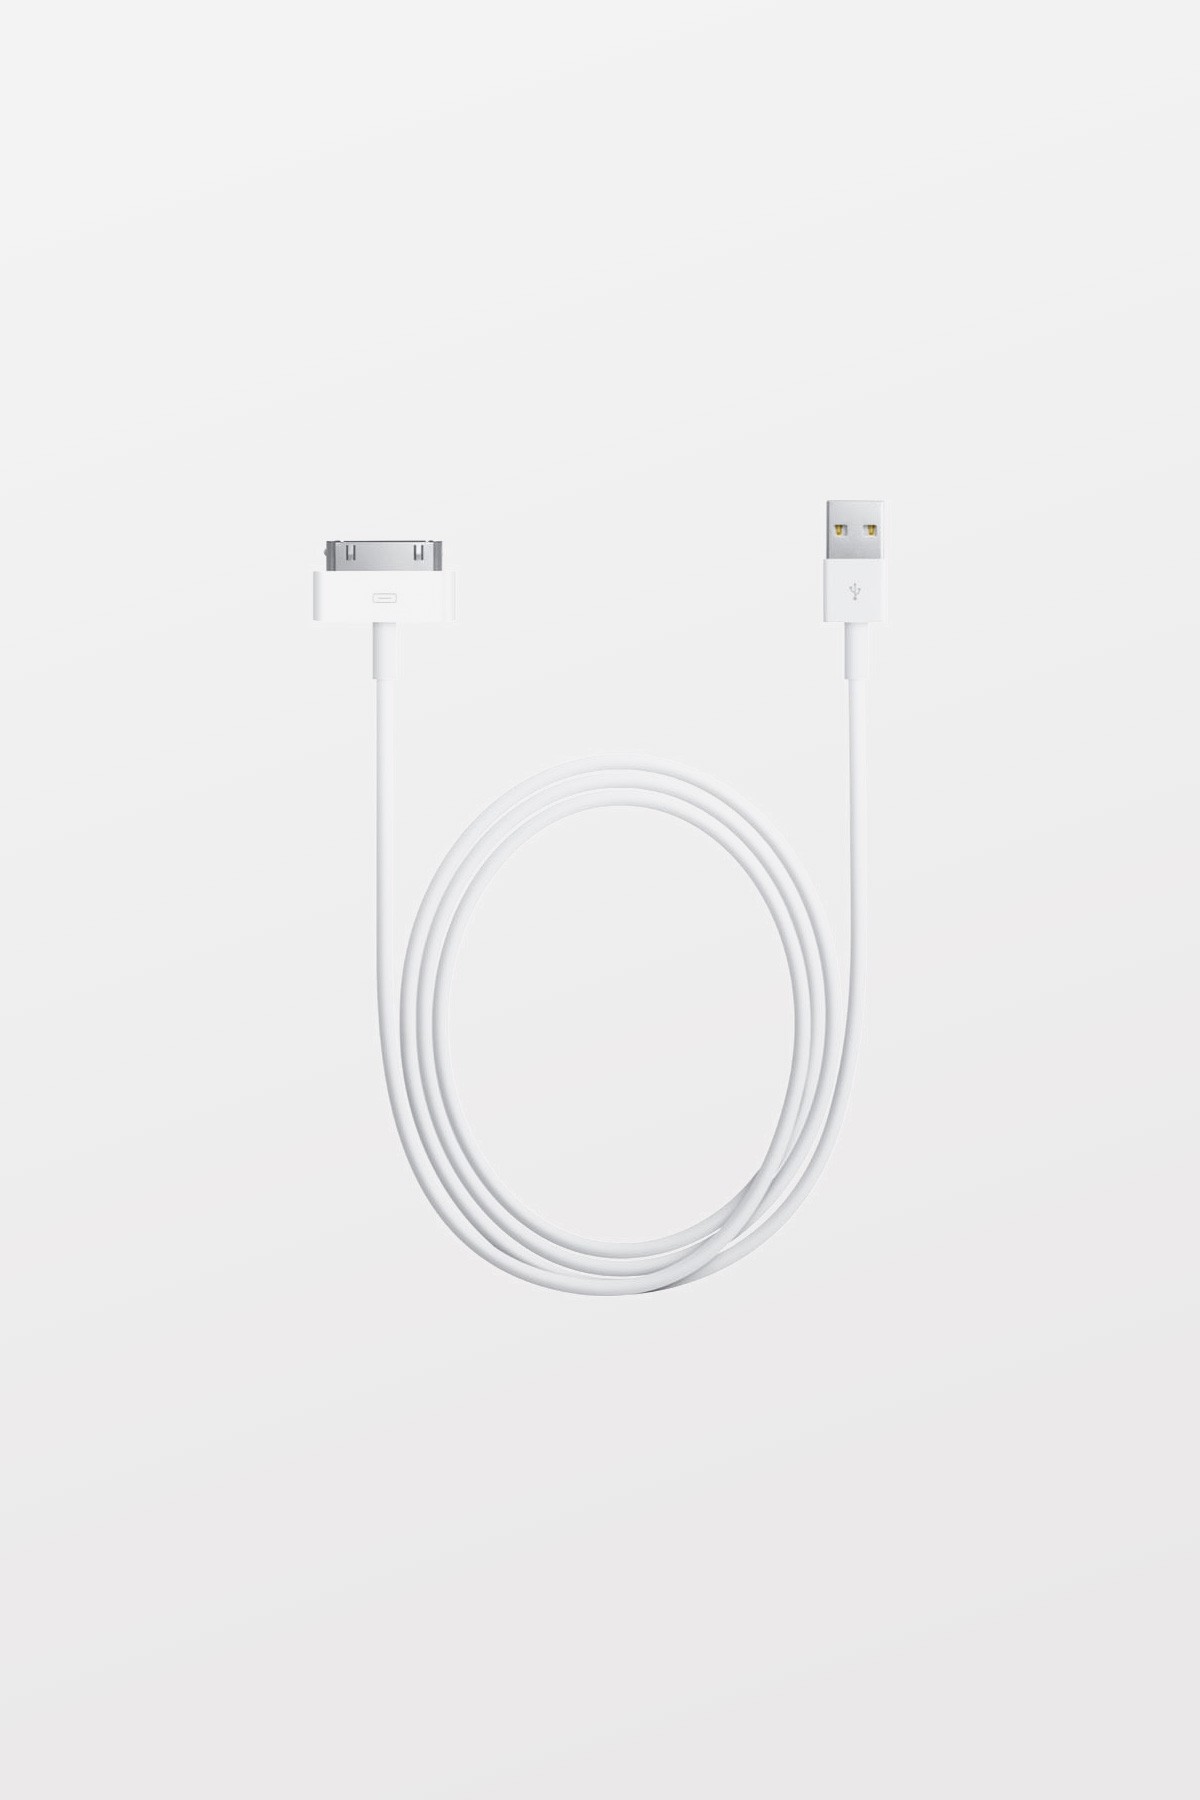 Apple 30-Pin TO USB 2.0 Cable
